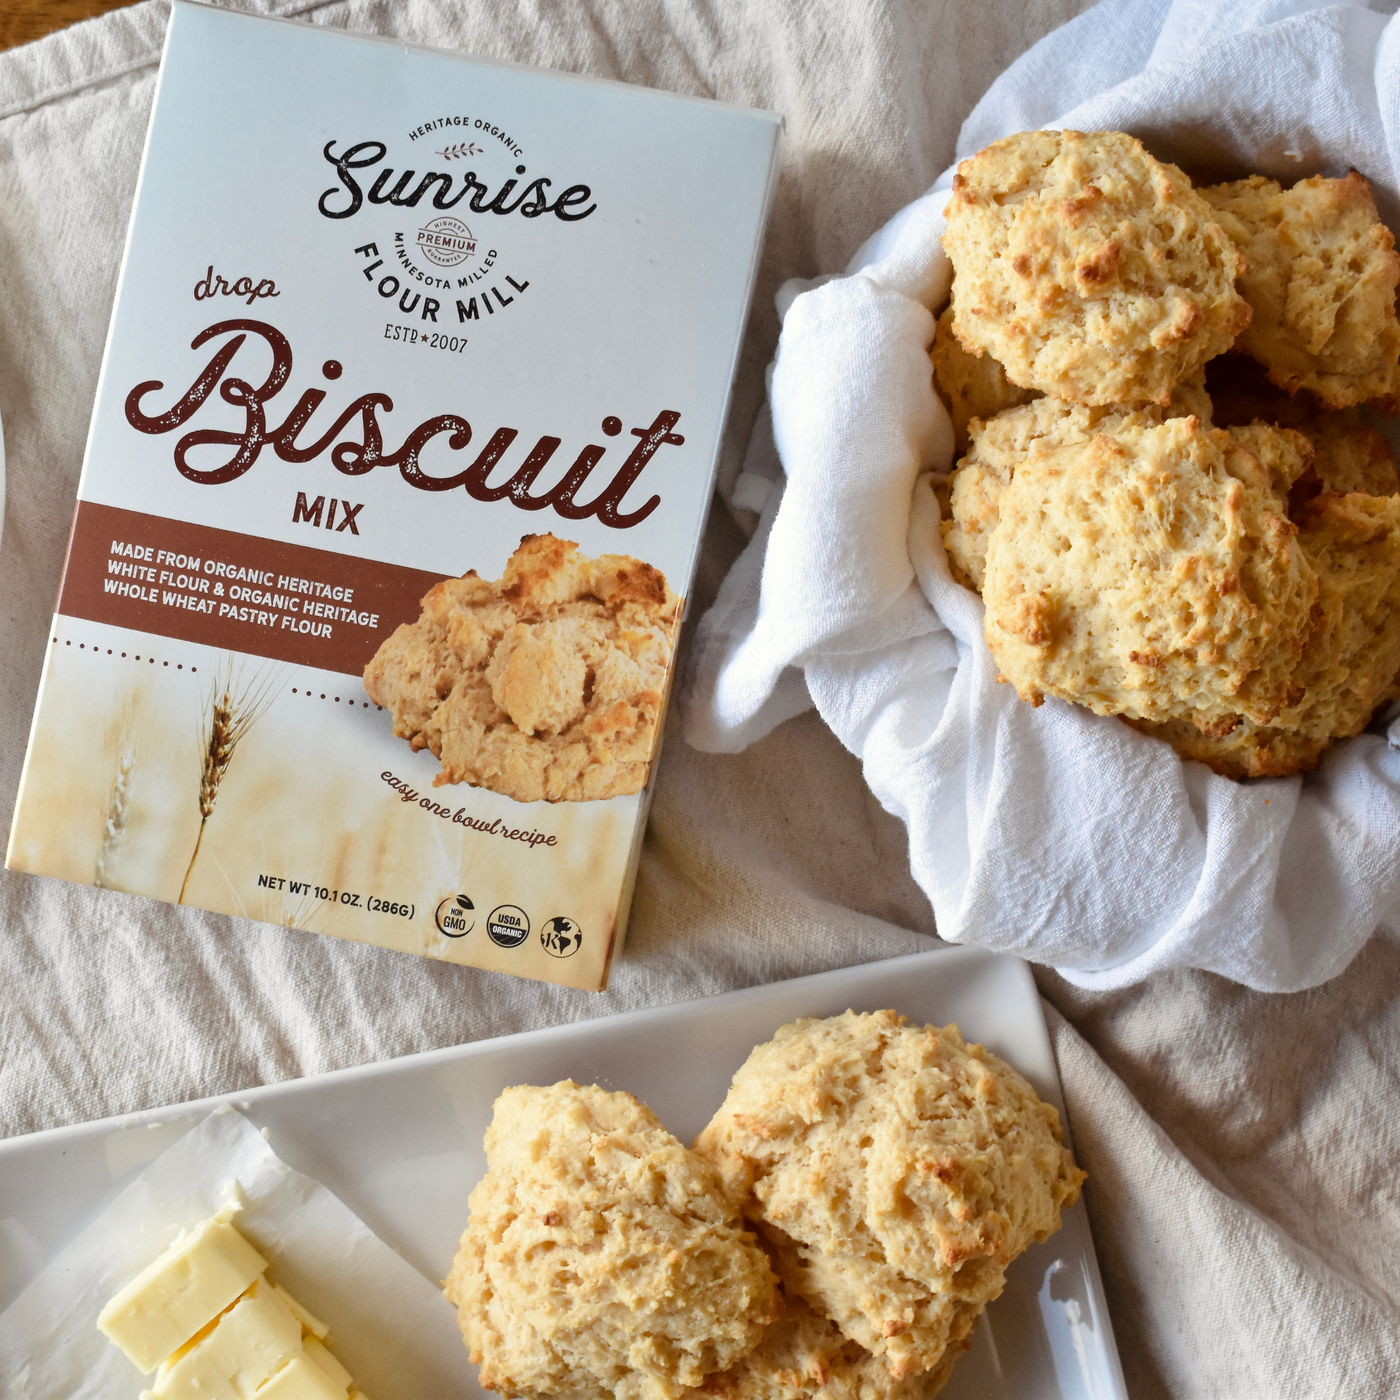 Heritage biscuit mix with finished biscuits